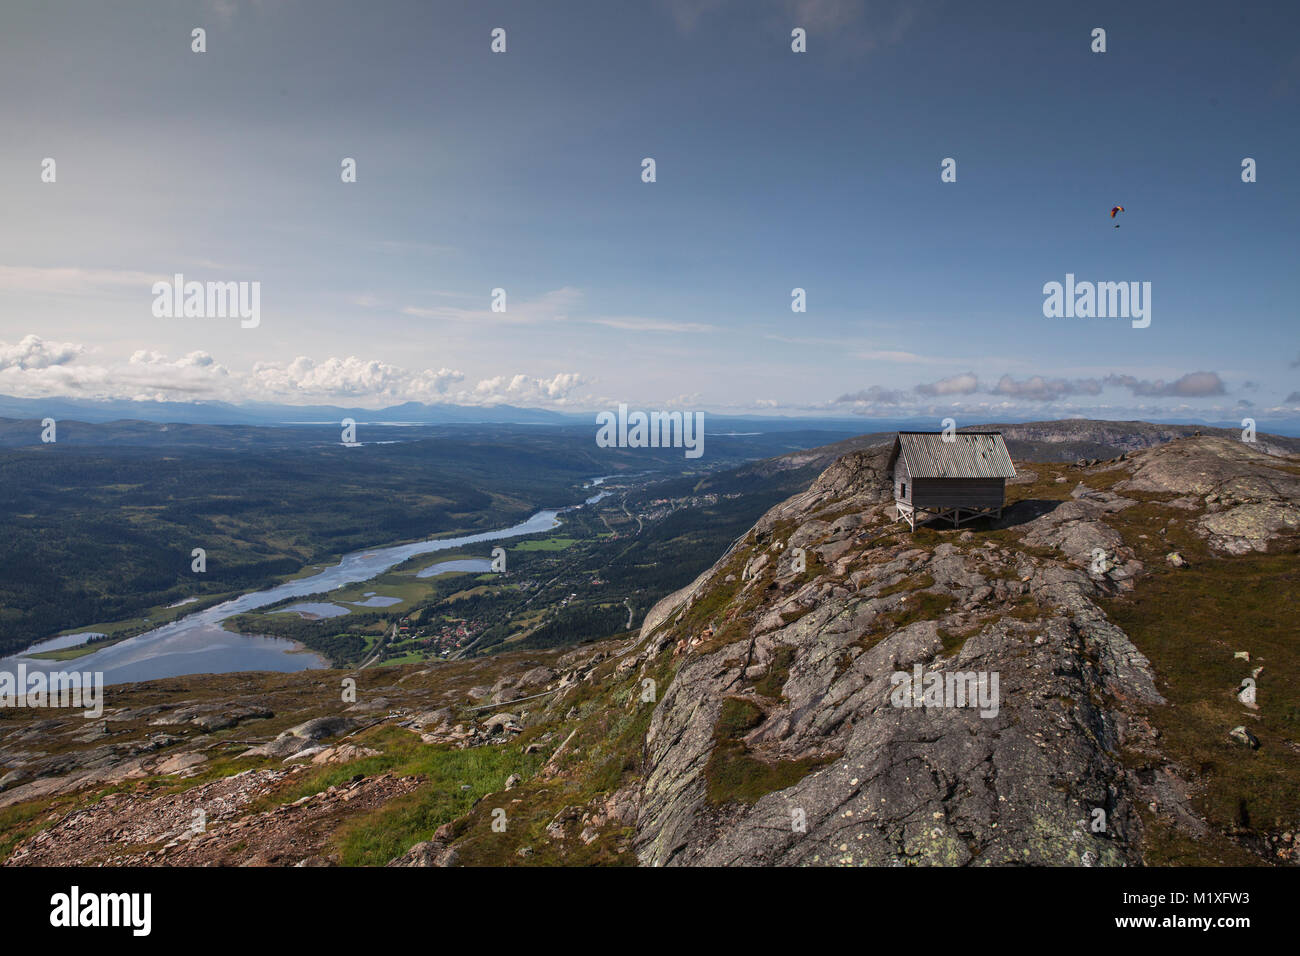 Cabin on mountain in Are, Sweden Stock Photo